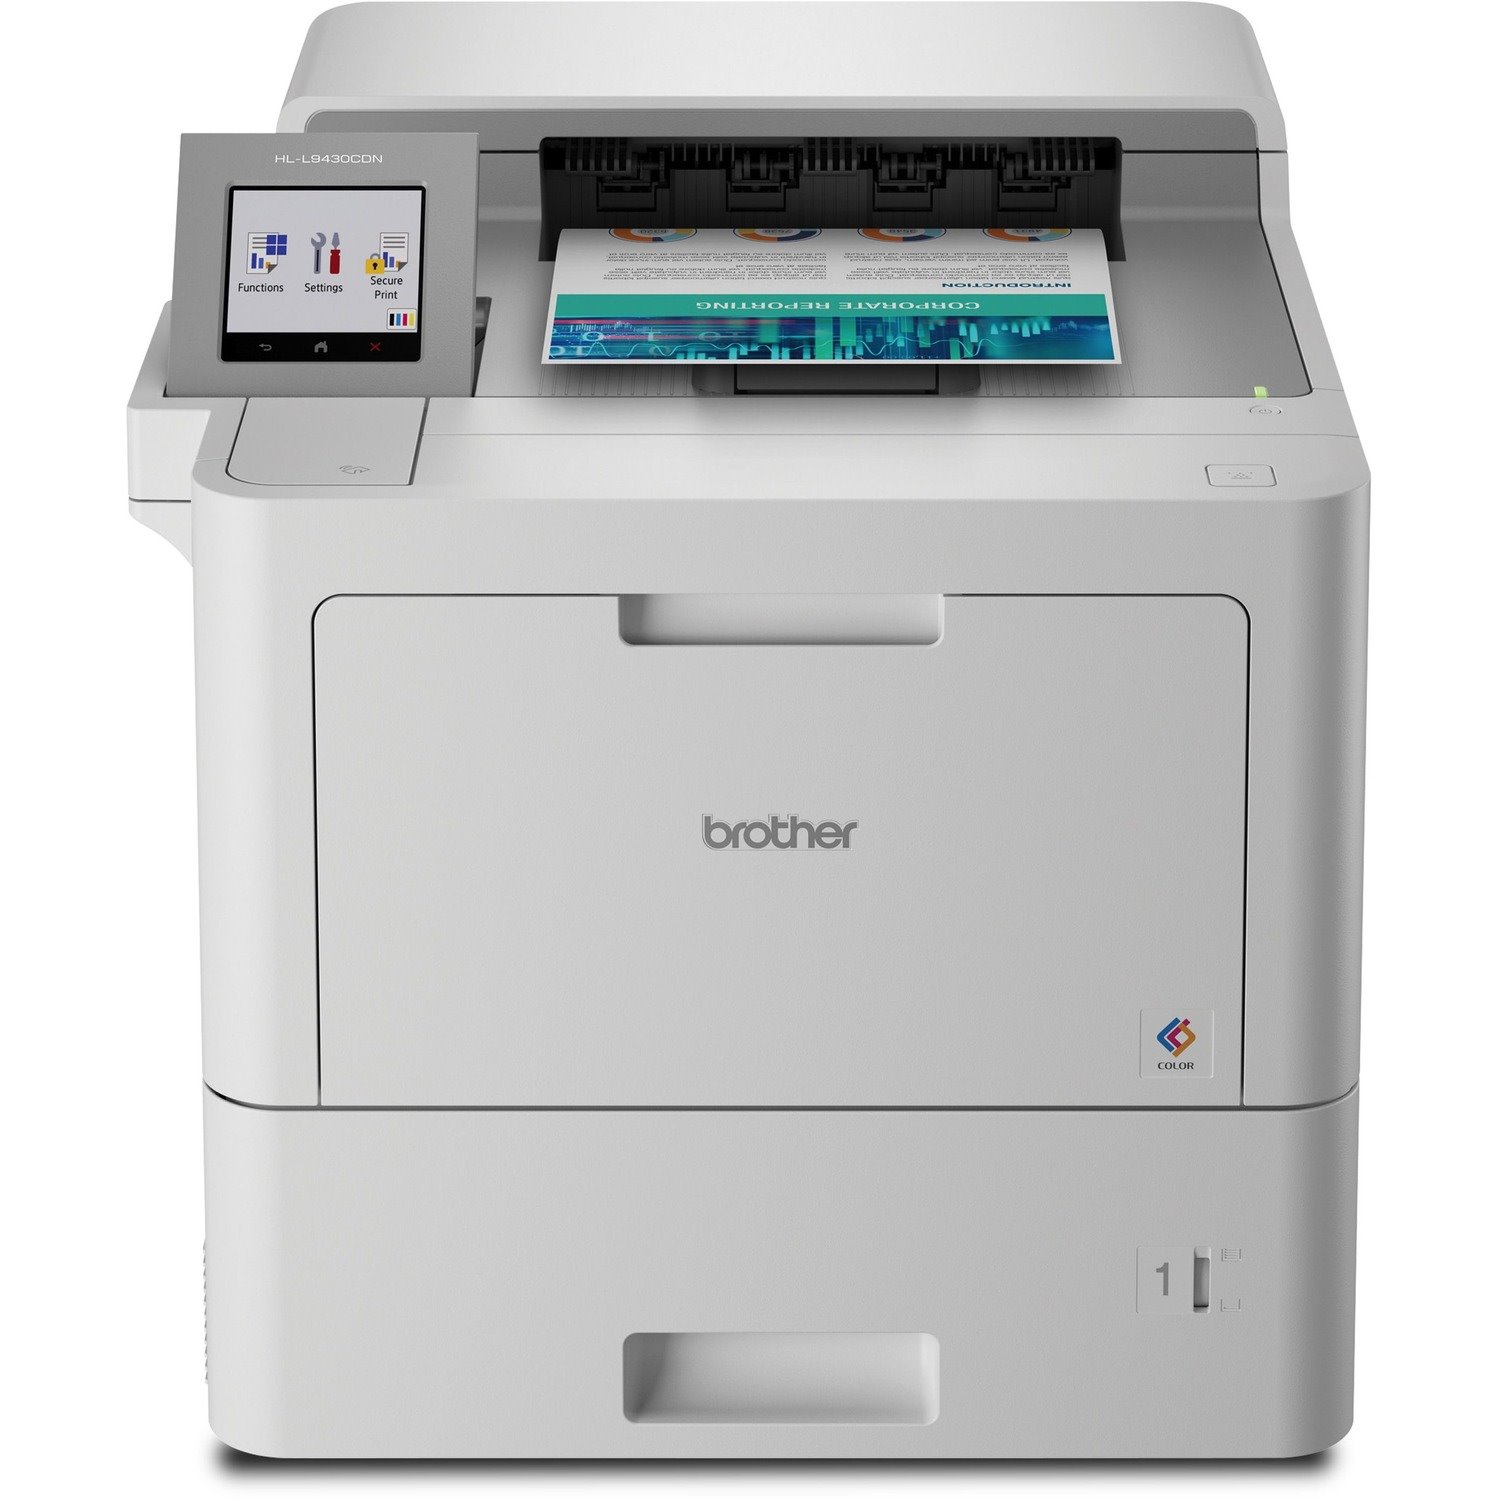 Brother Workhorse HL-L9430CDN Enterprise Color Laser Printer with Fast Printing, Large Paper Capacity, and Advanced Security Features